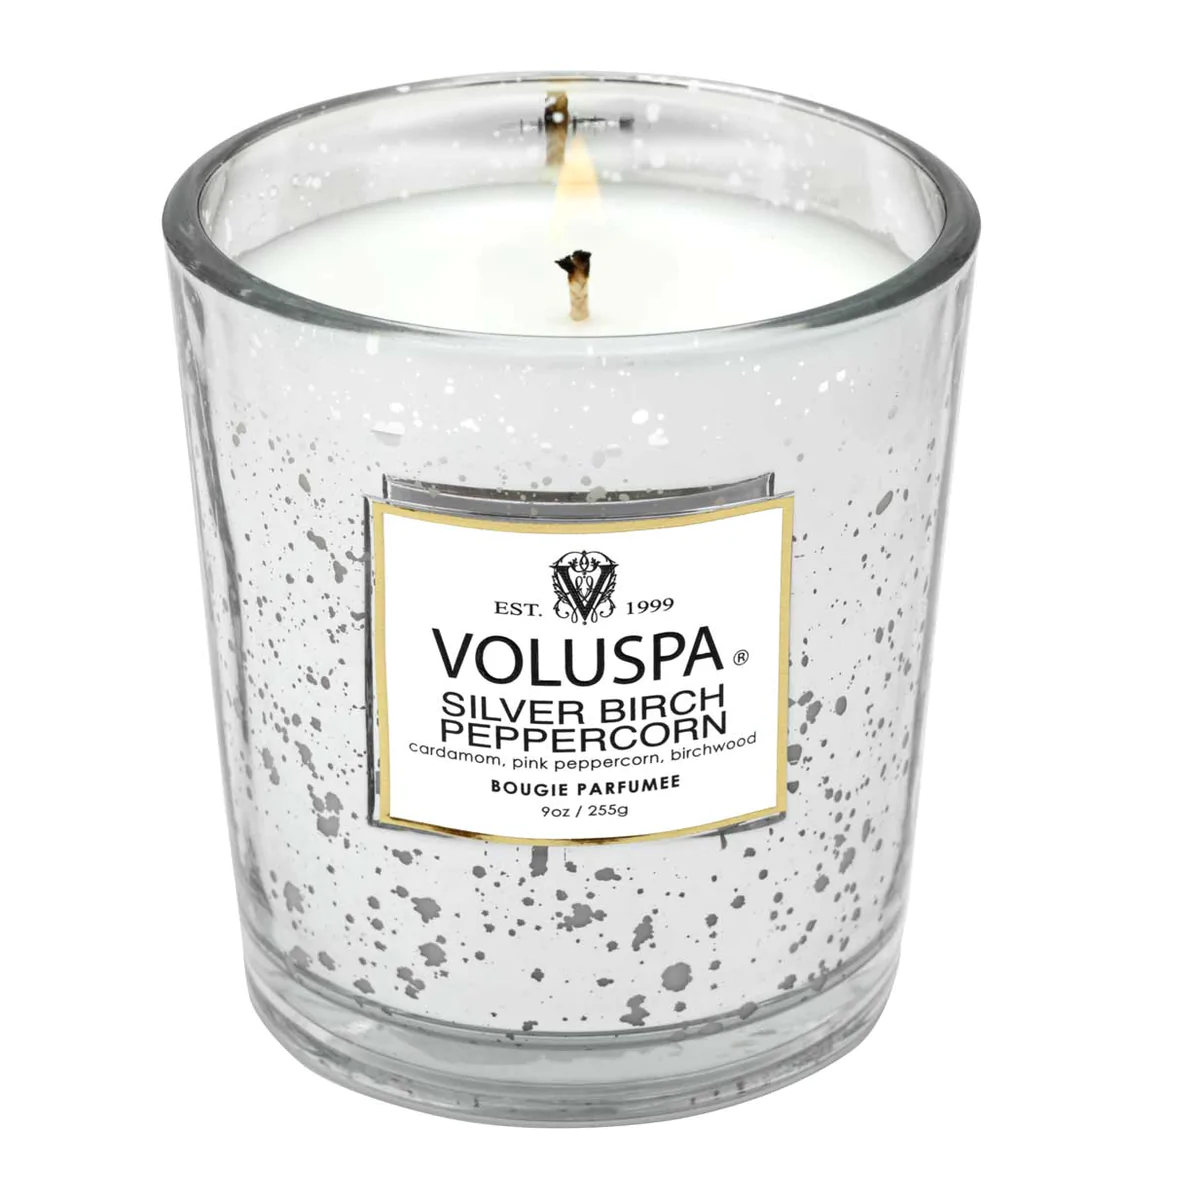 Boxed candle silver birch peppercorn